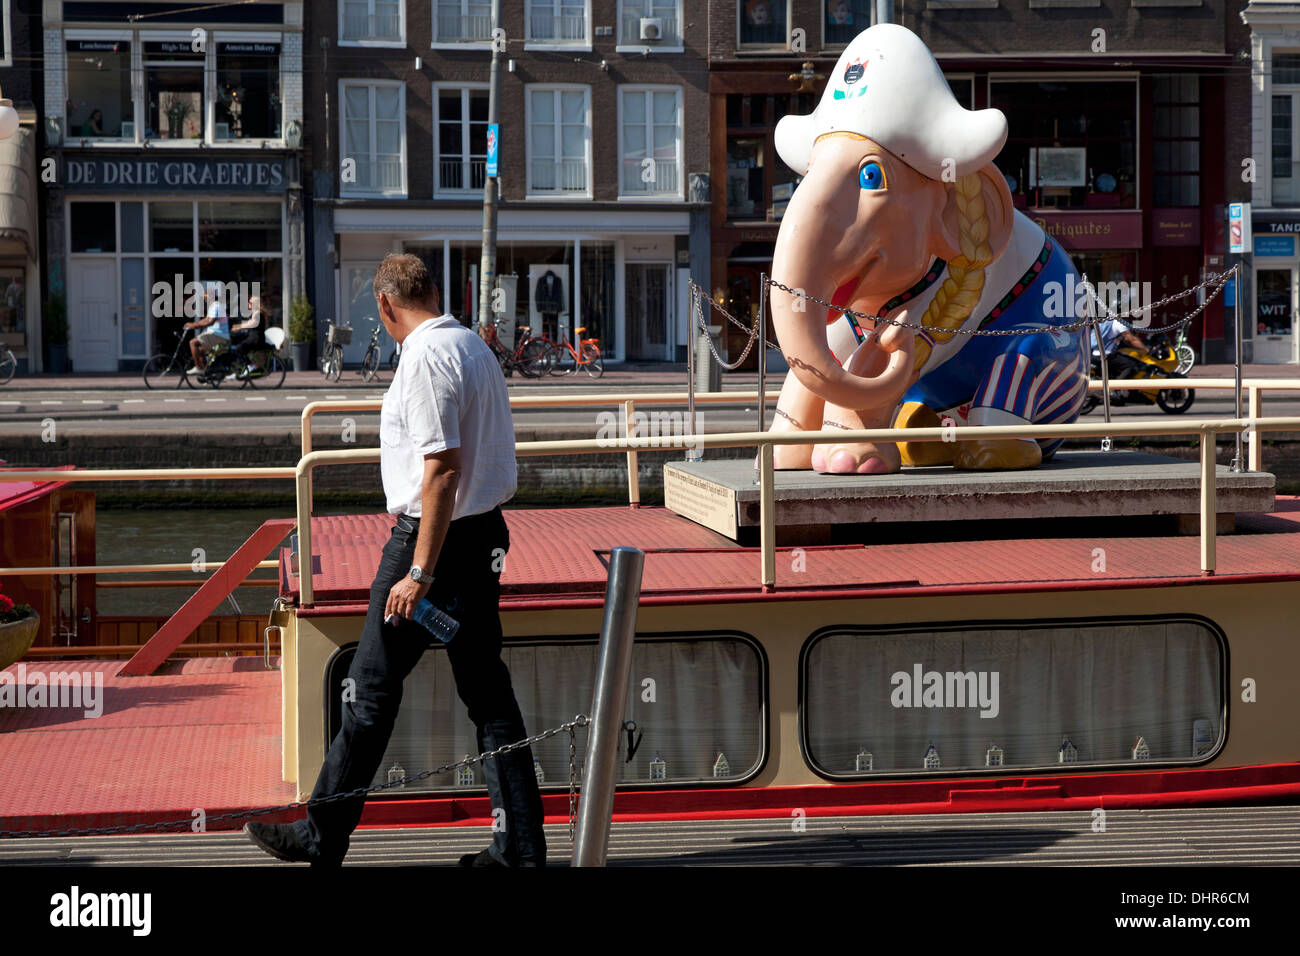 Decorated sightseeing boat on the Rokin in Amsterdam, Netherlands Stock Photo